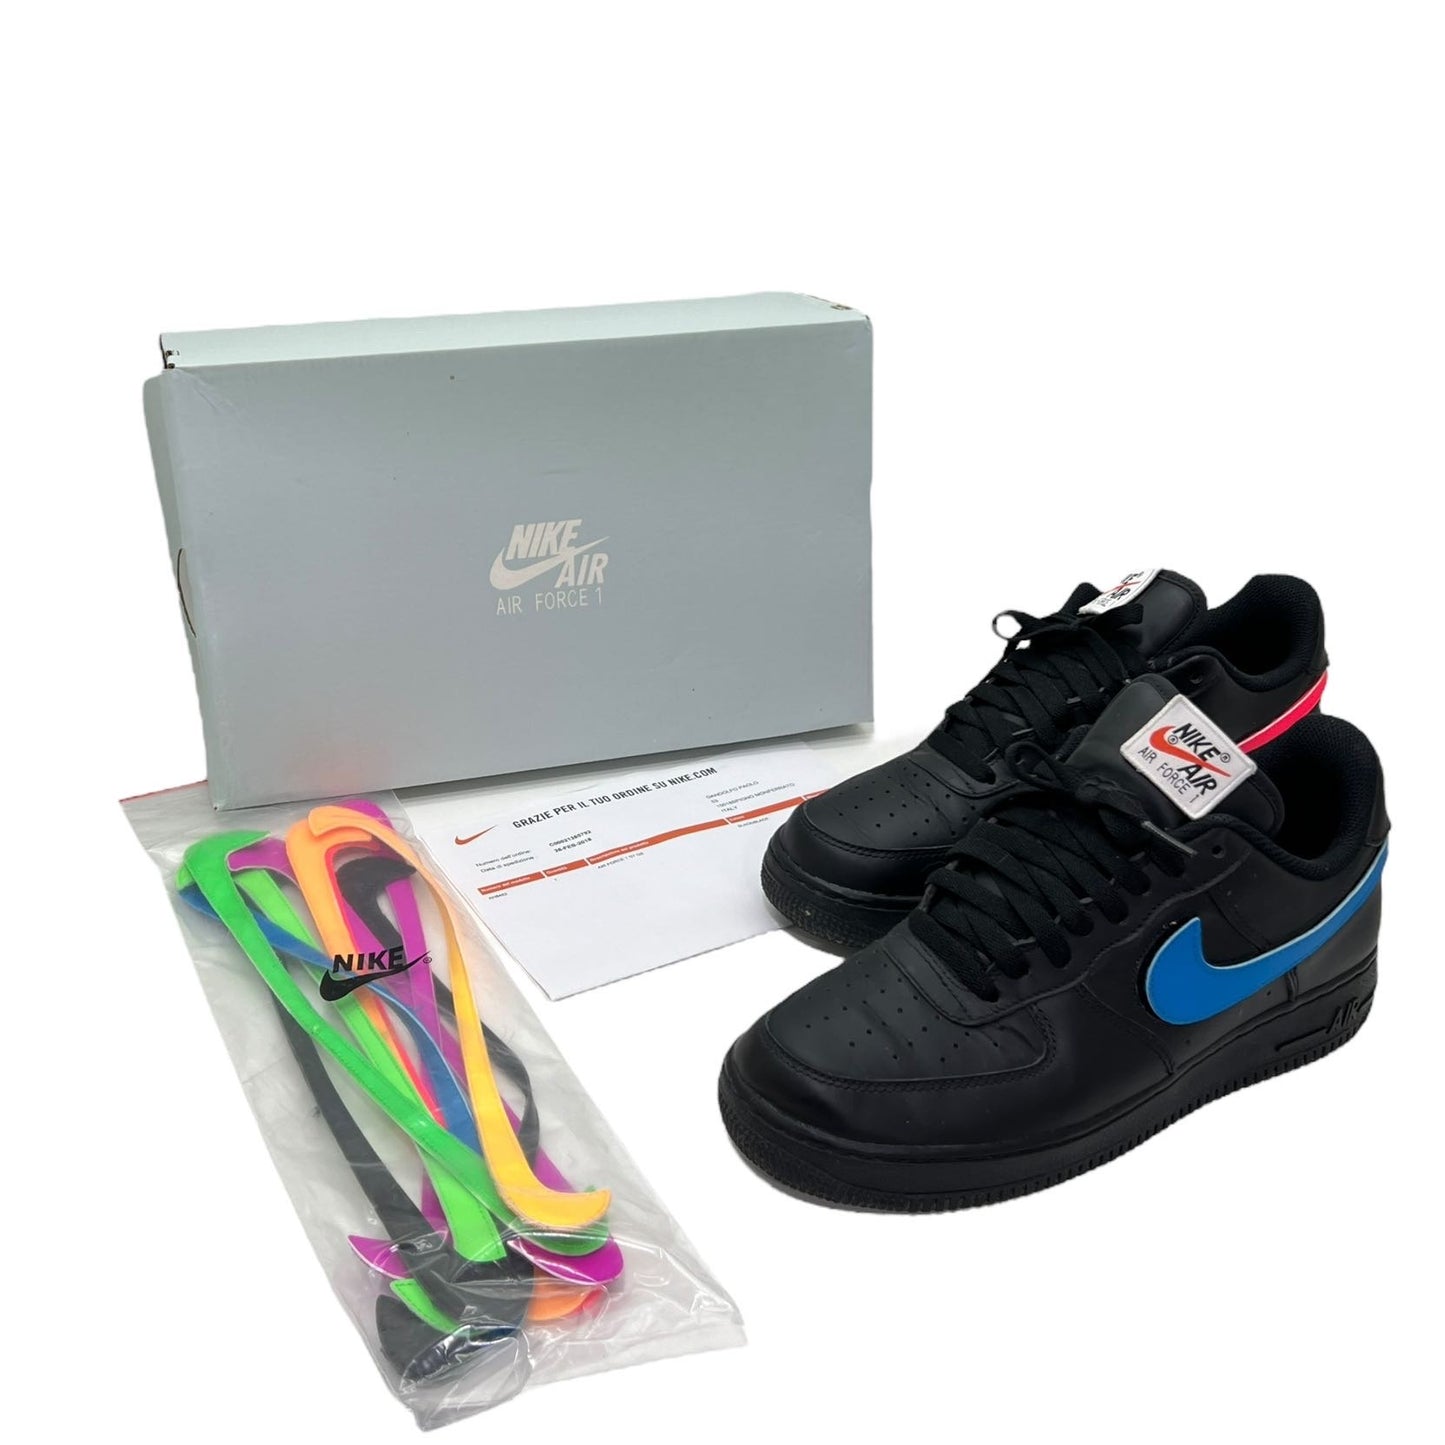 AIR FORCE 1 SWOOSH PACK ALL-STAR (2018) TG 41